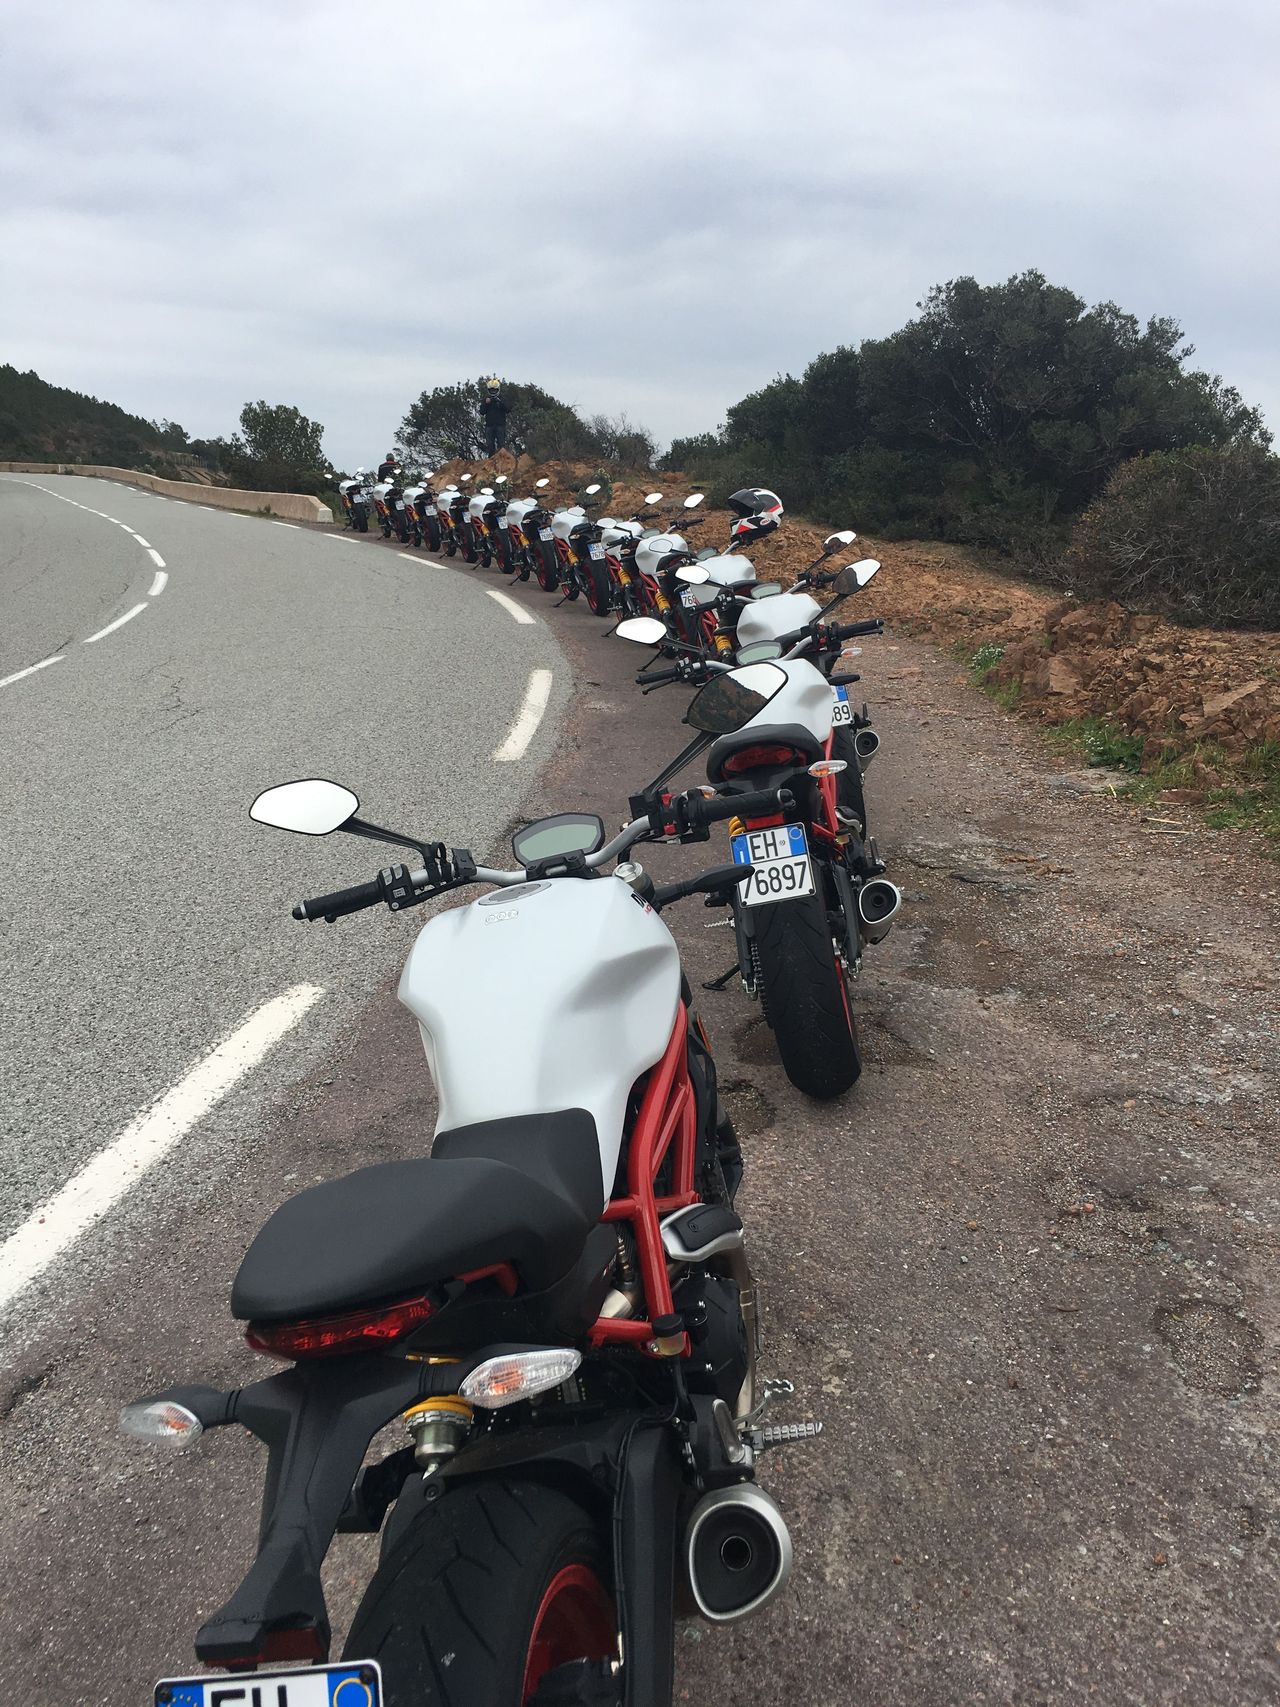 Monster 797 - Is this what they mean when they say "putting all your Ducs in a row"